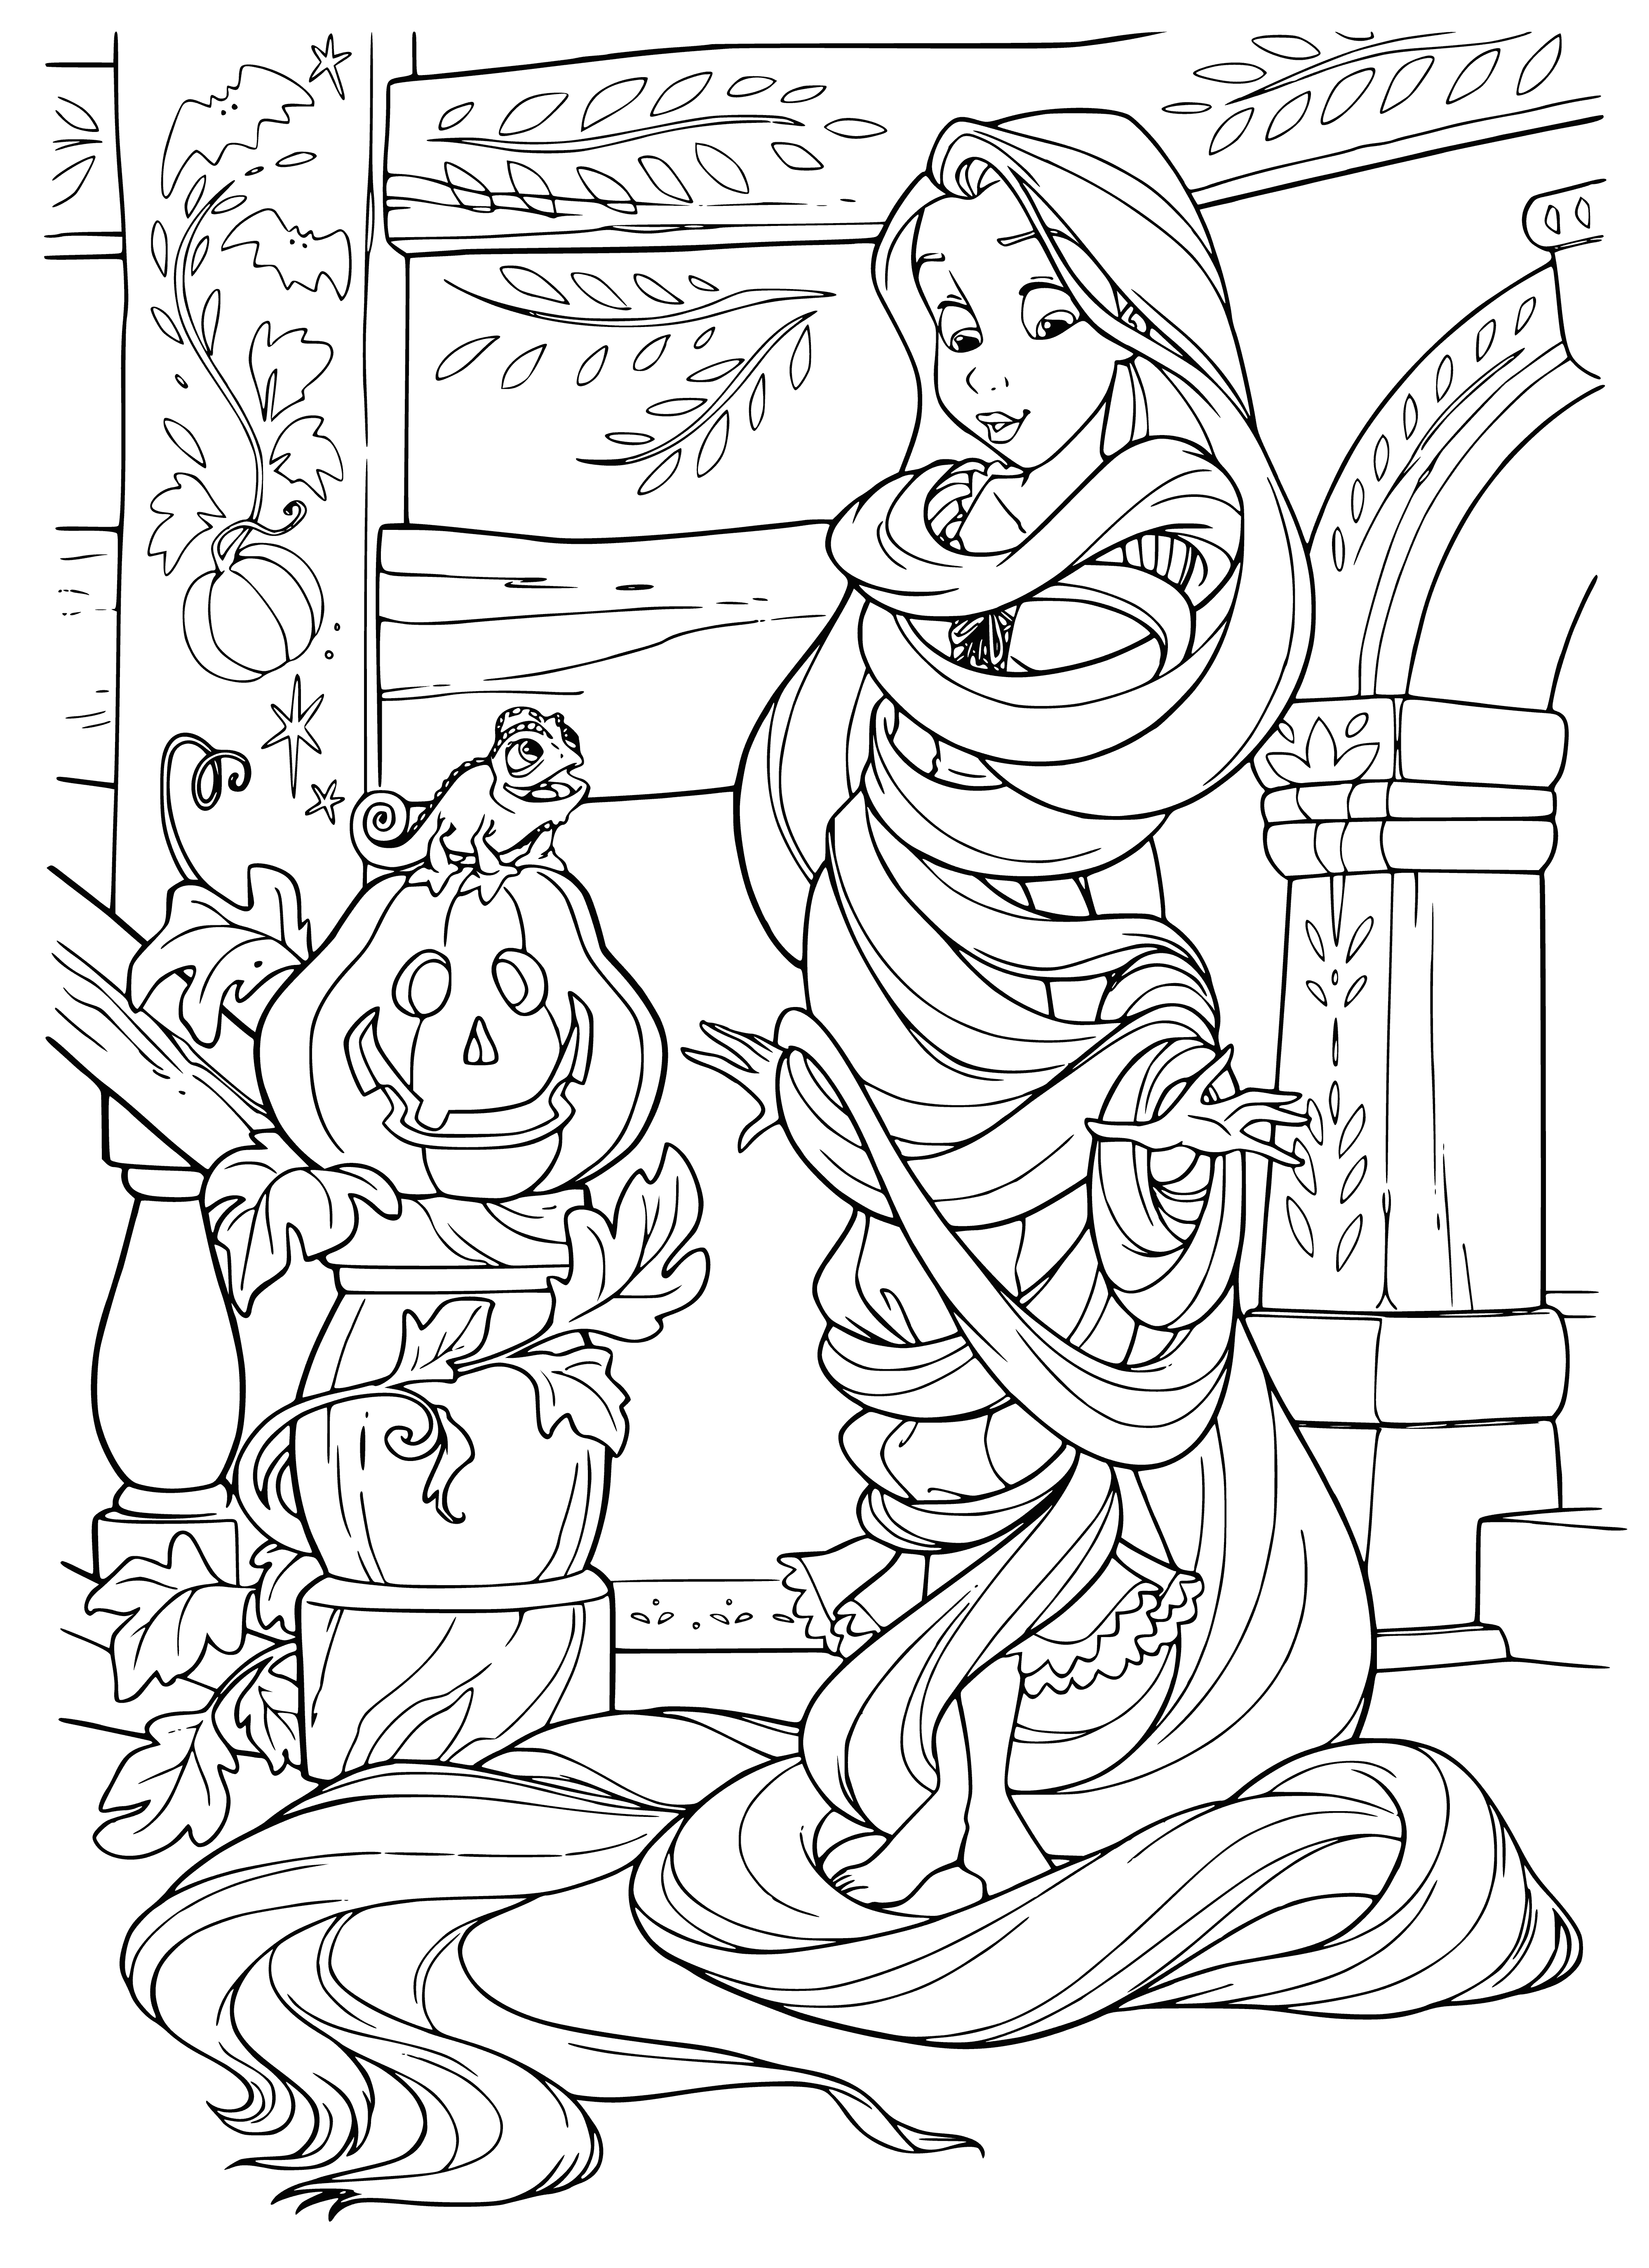 Rapunzel is getting ready for Halloween coloring page